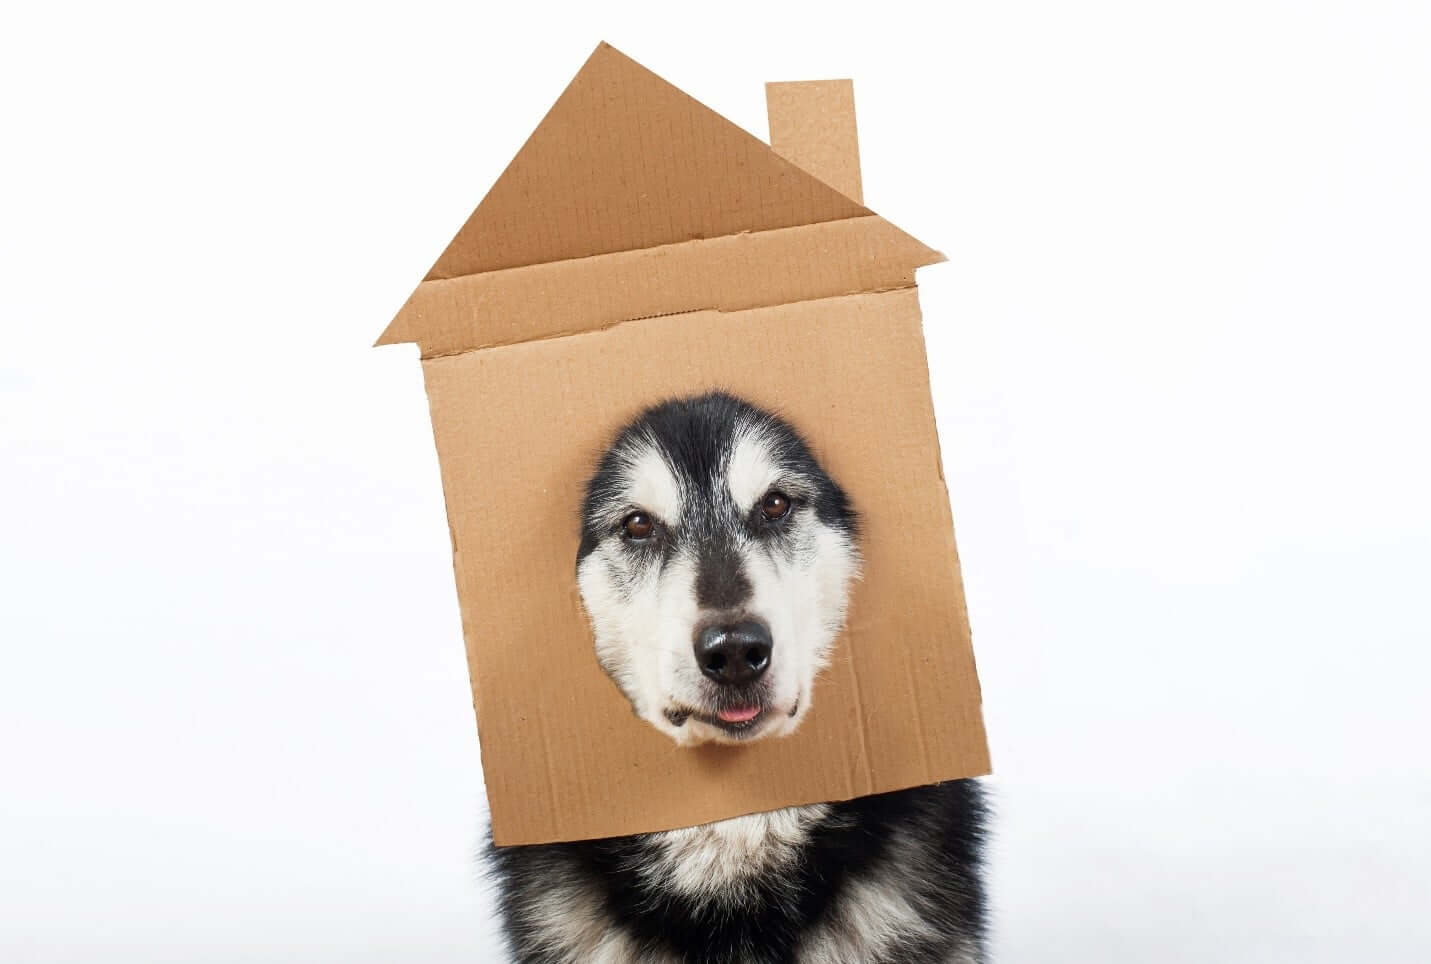 Dog with house mask